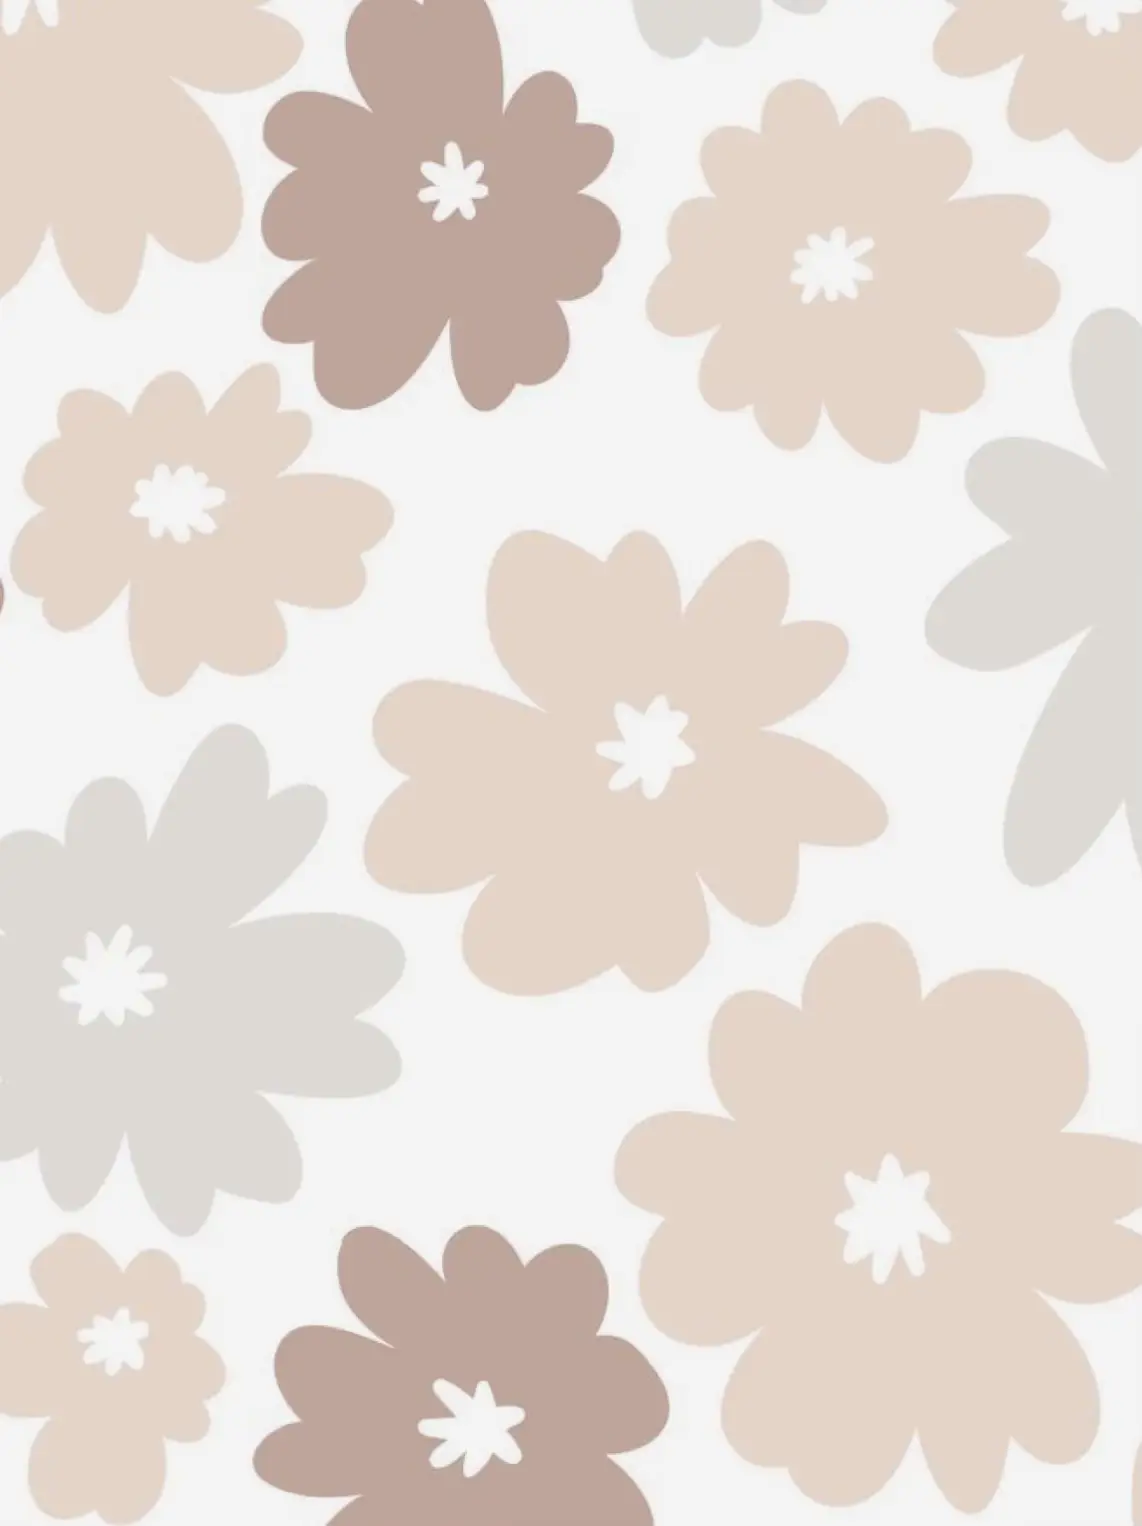  A flower pattern with a white background.